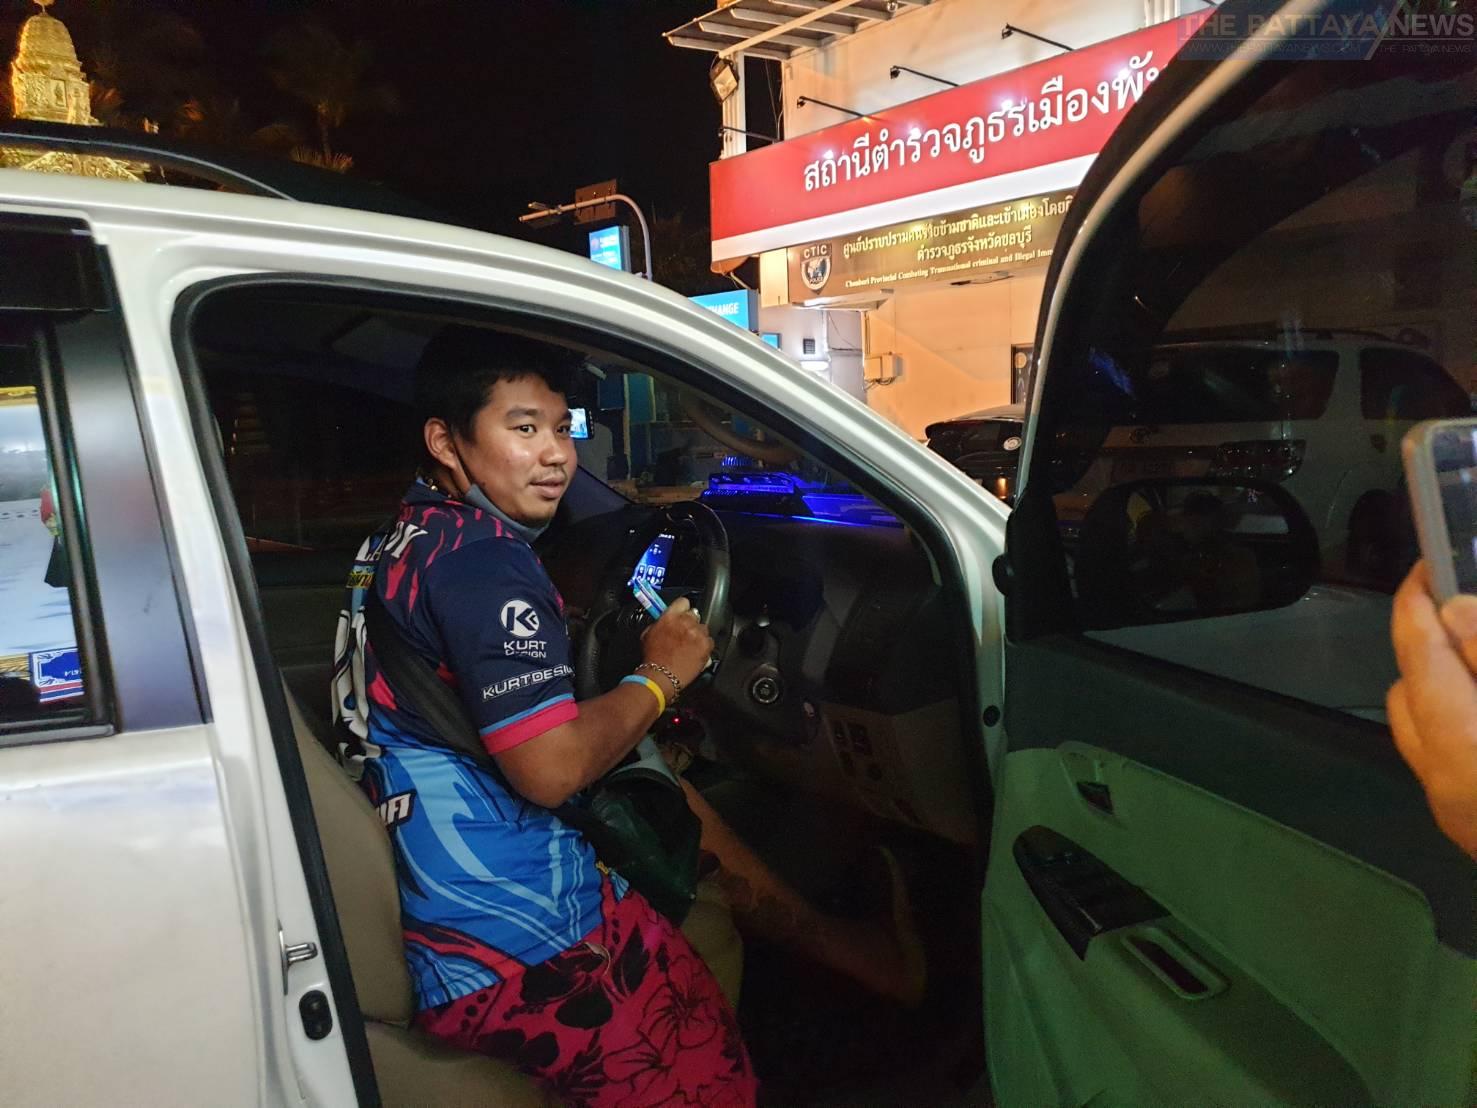 25-year-old driver fined for illegally opening sirens in Pattaya